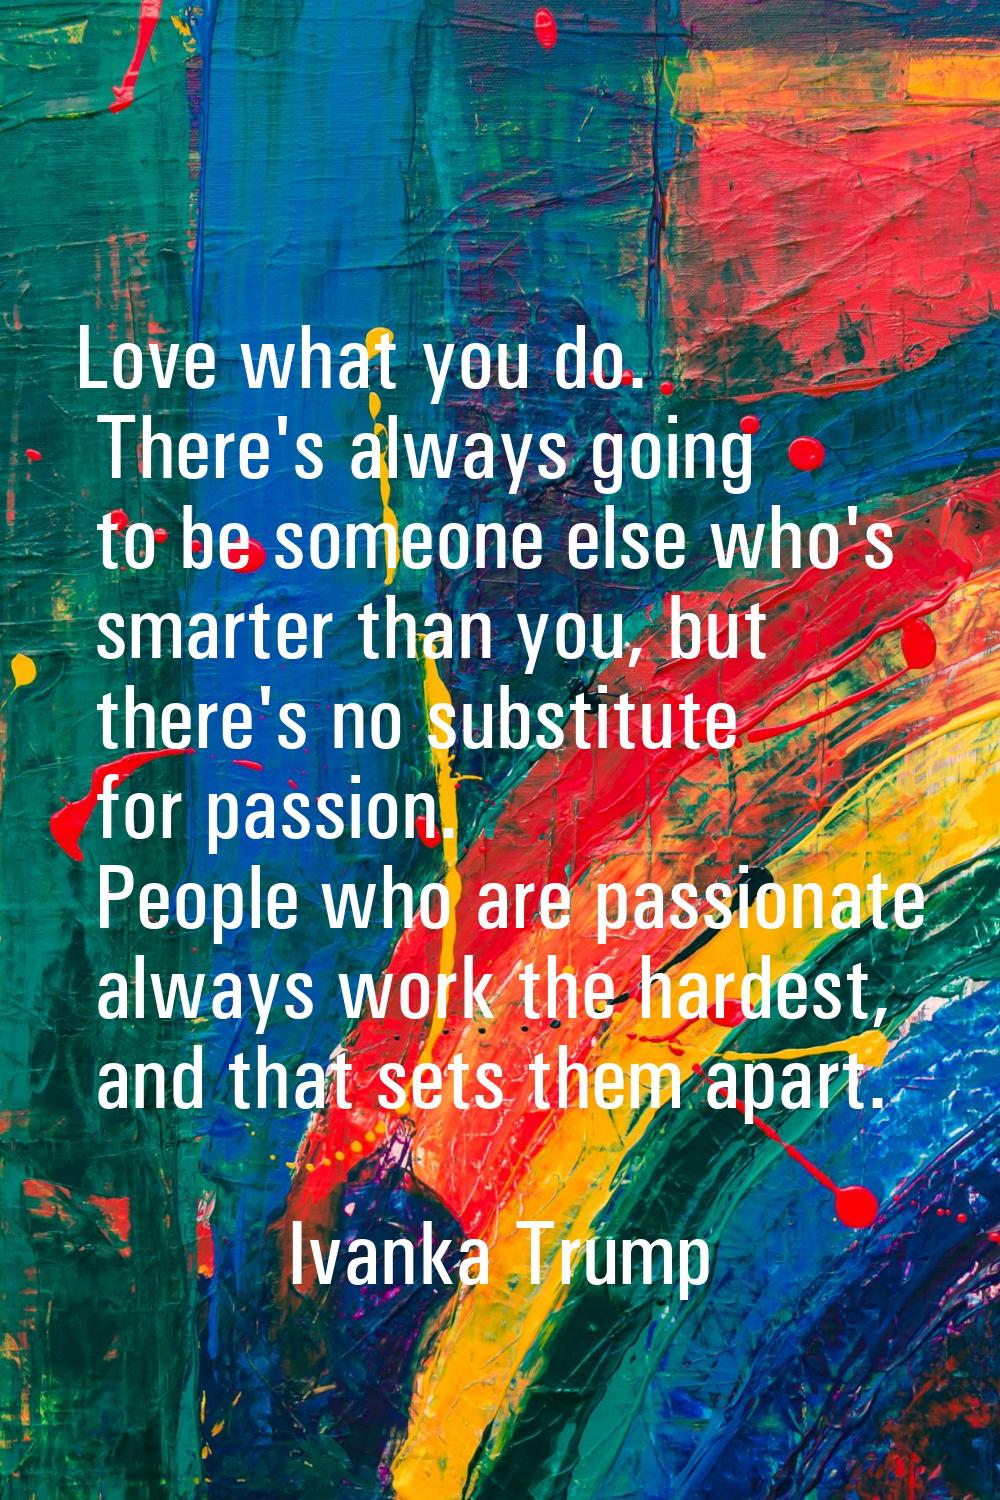 Love what you do. There's always going to be someone else who's smarter than you, but there's no su